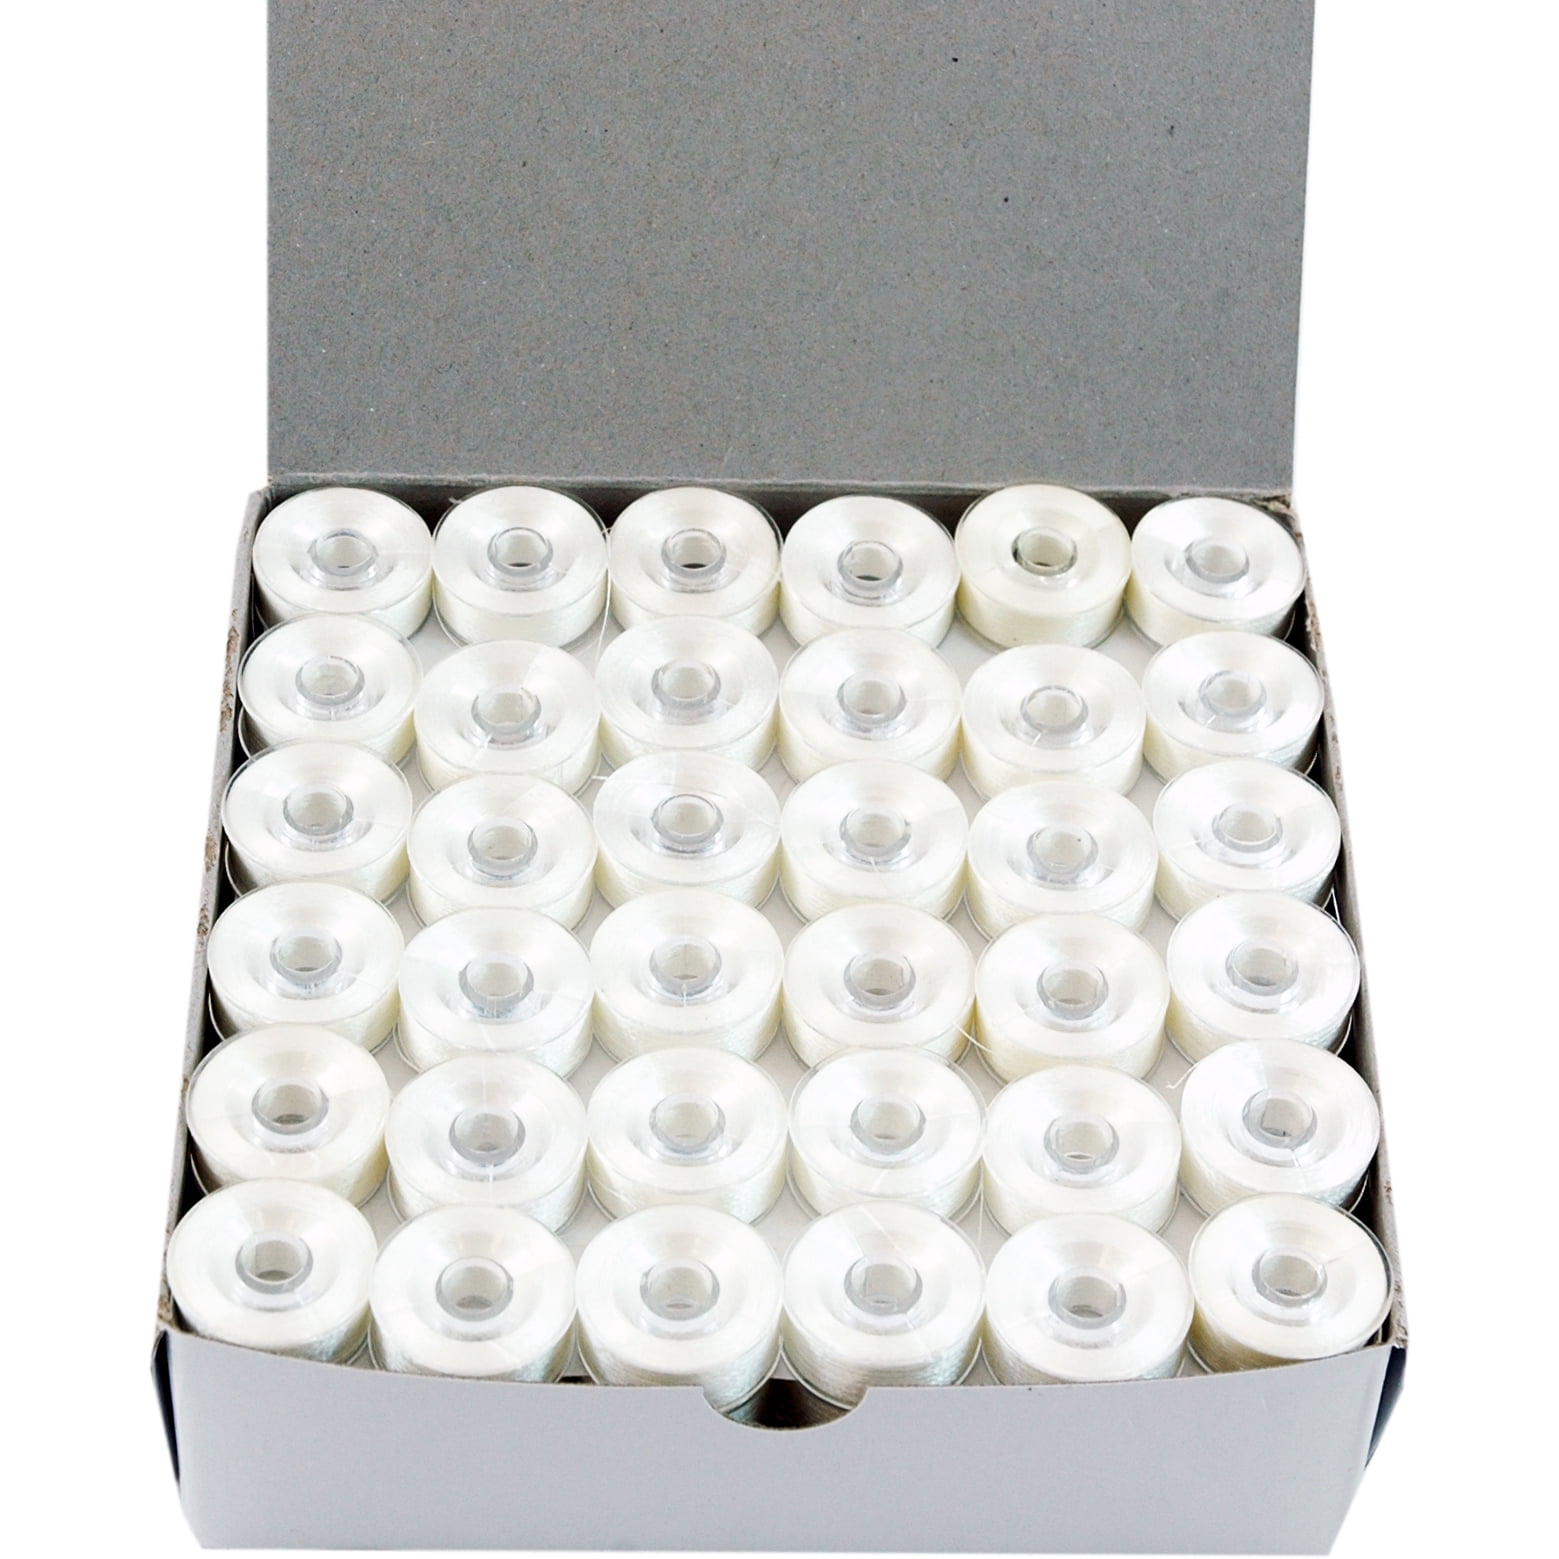 Threadart Prewound Embroidery Bobbins- 144 Count Per Box - White Plastic  Sided - A Style - 6 Options Available 